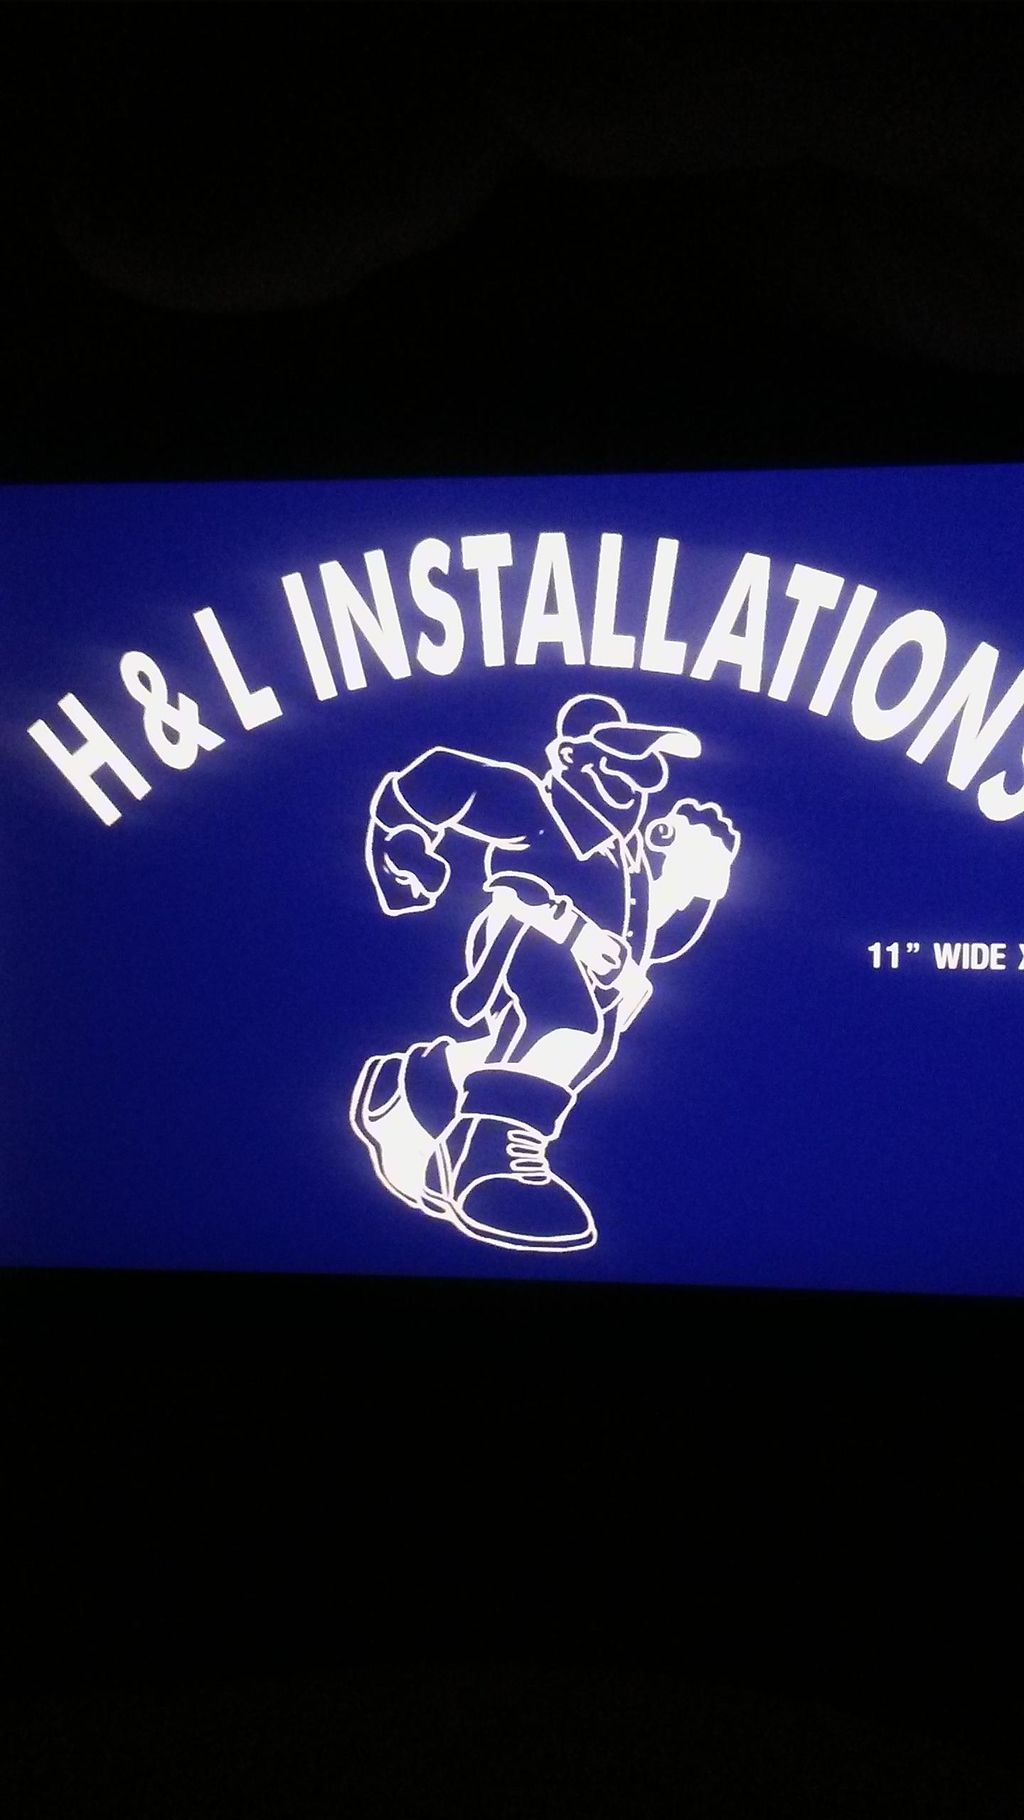 H and l installation